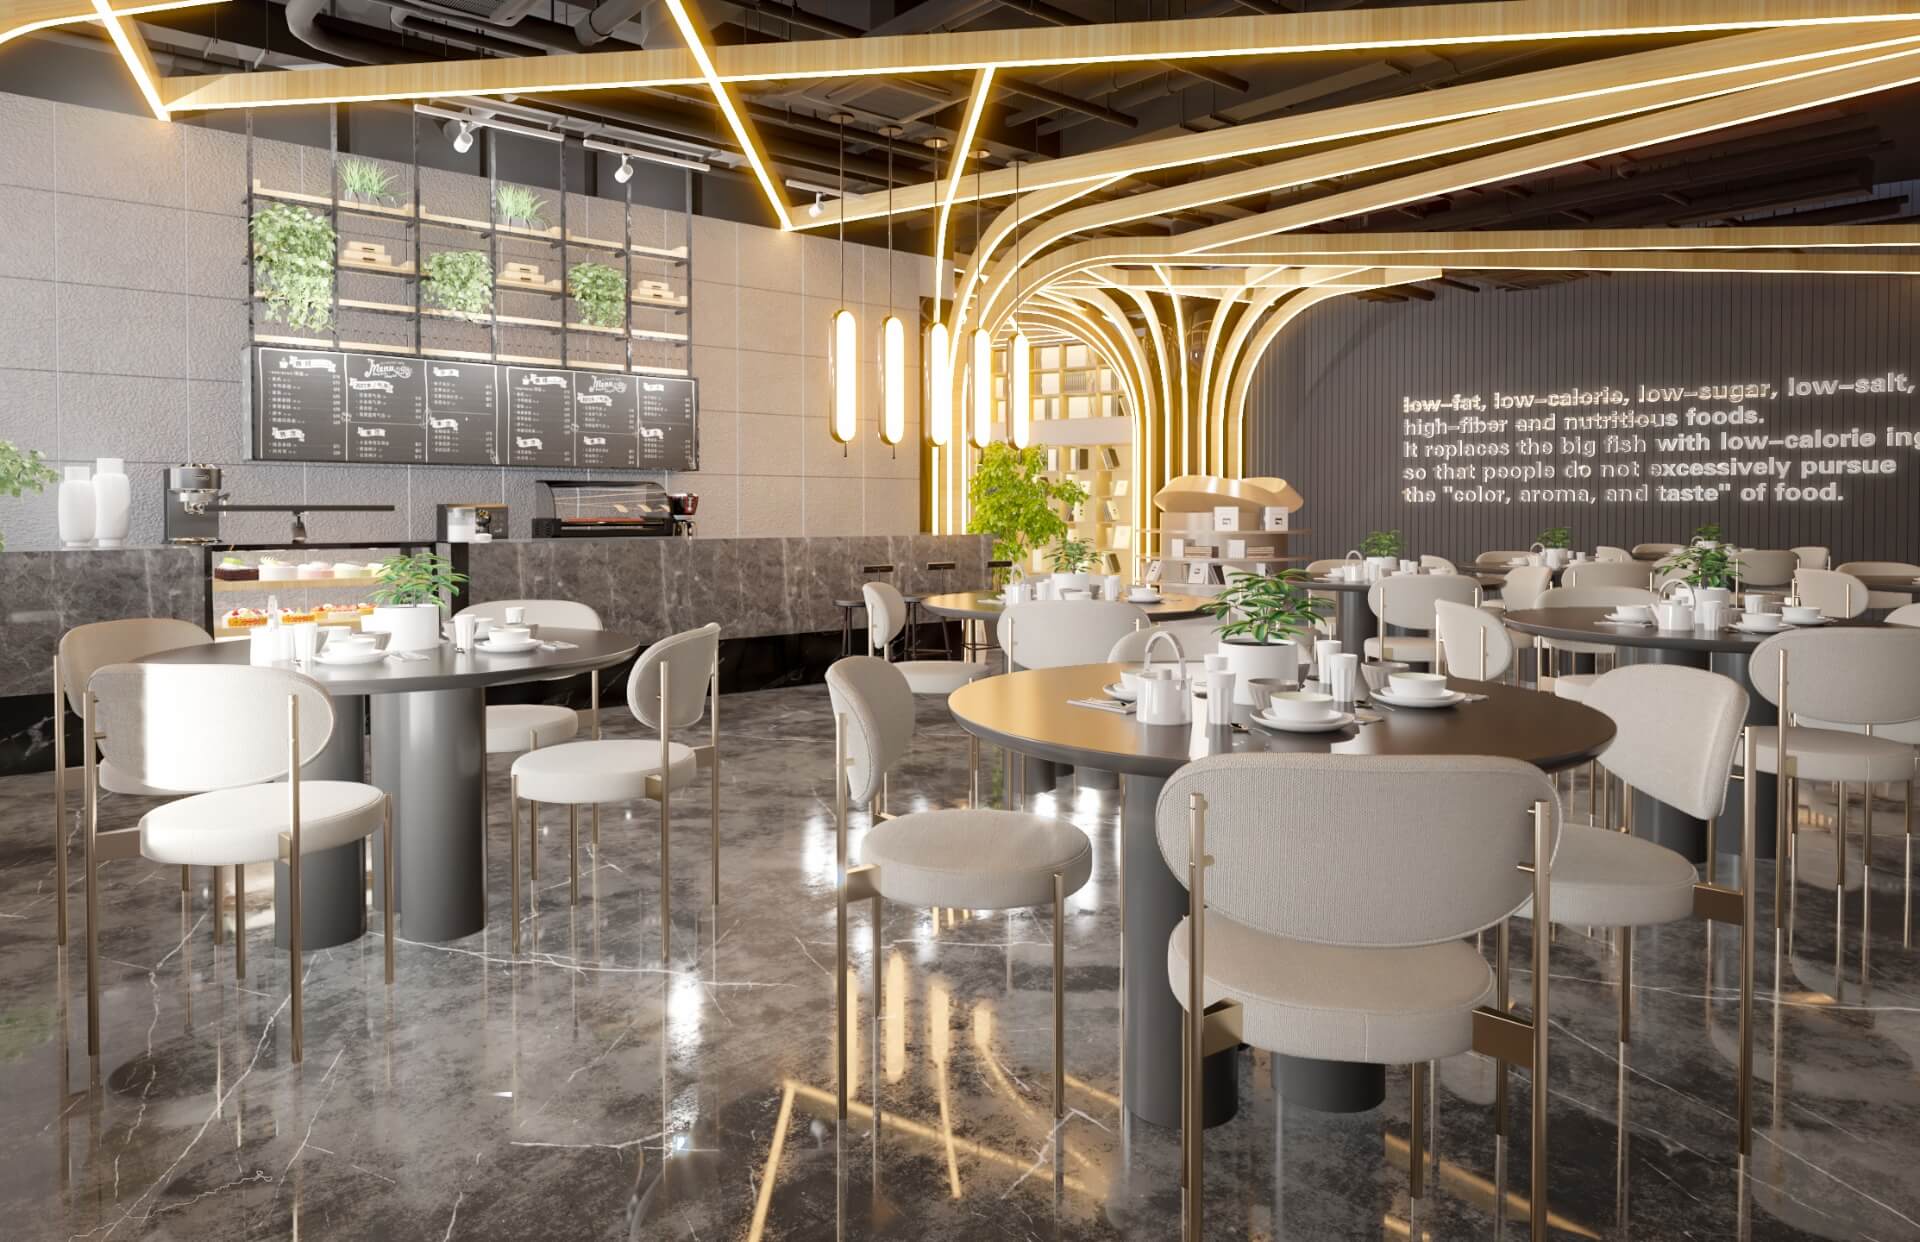 Behind-the-scenes look at restaurant fit out in Dubai